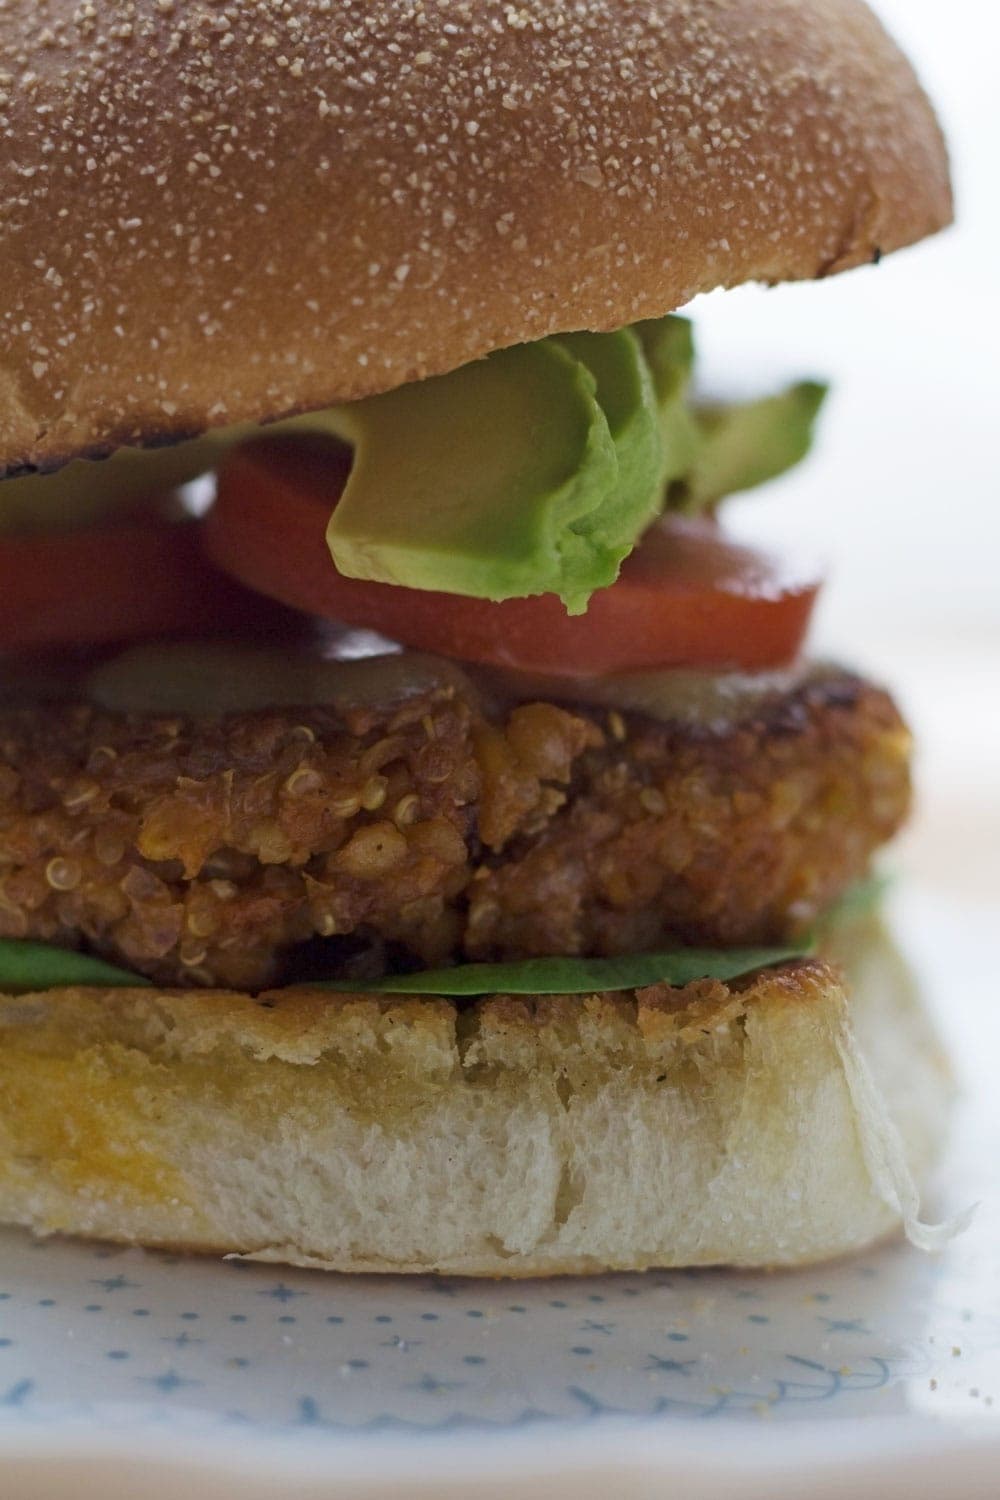 These chickpea quinoa veggie burgers are the perfect summer treat. Even meat lovers will adore these healthy, filling burgers.